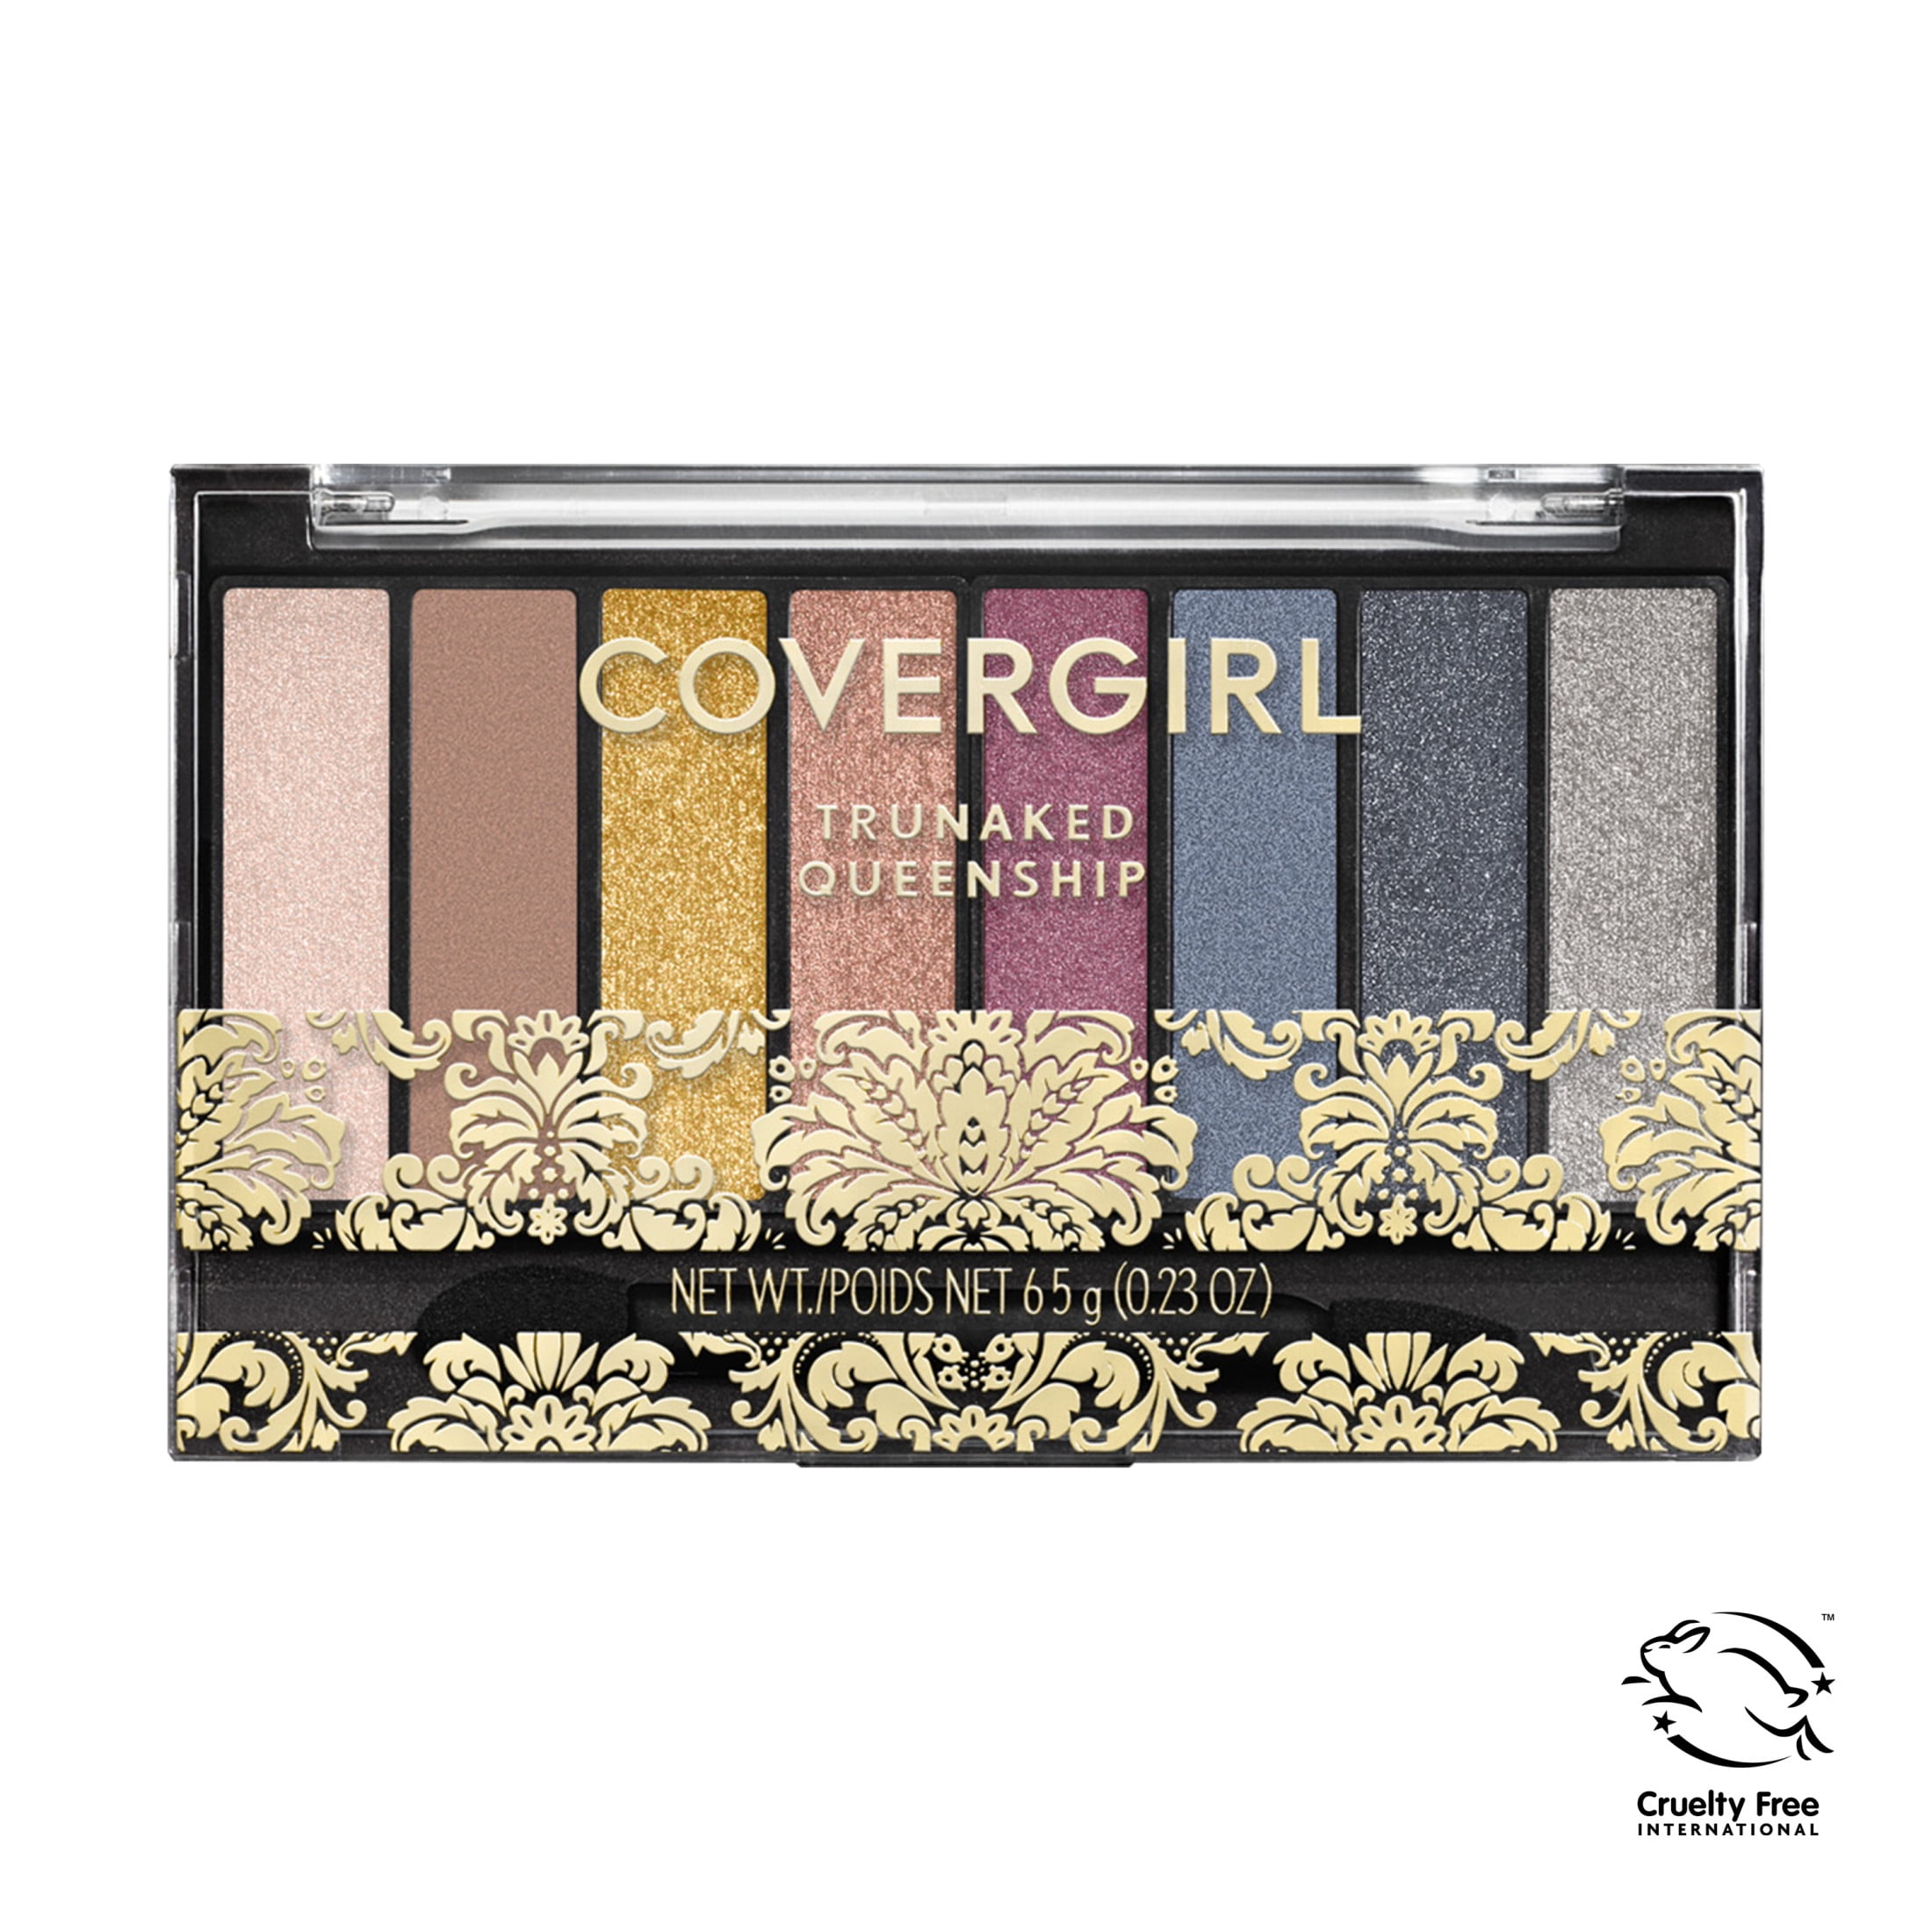 COVERGIRL TruNaked Queenship Eyeshadow Palette, 8 Shades, Flawless Look, 1 Pack ,Eyeshadow, Matte Eyeshadow, Shimmer Eyeshadow, Lush Eyeshadow Palette, Smooth, Blendable, Rich Payout